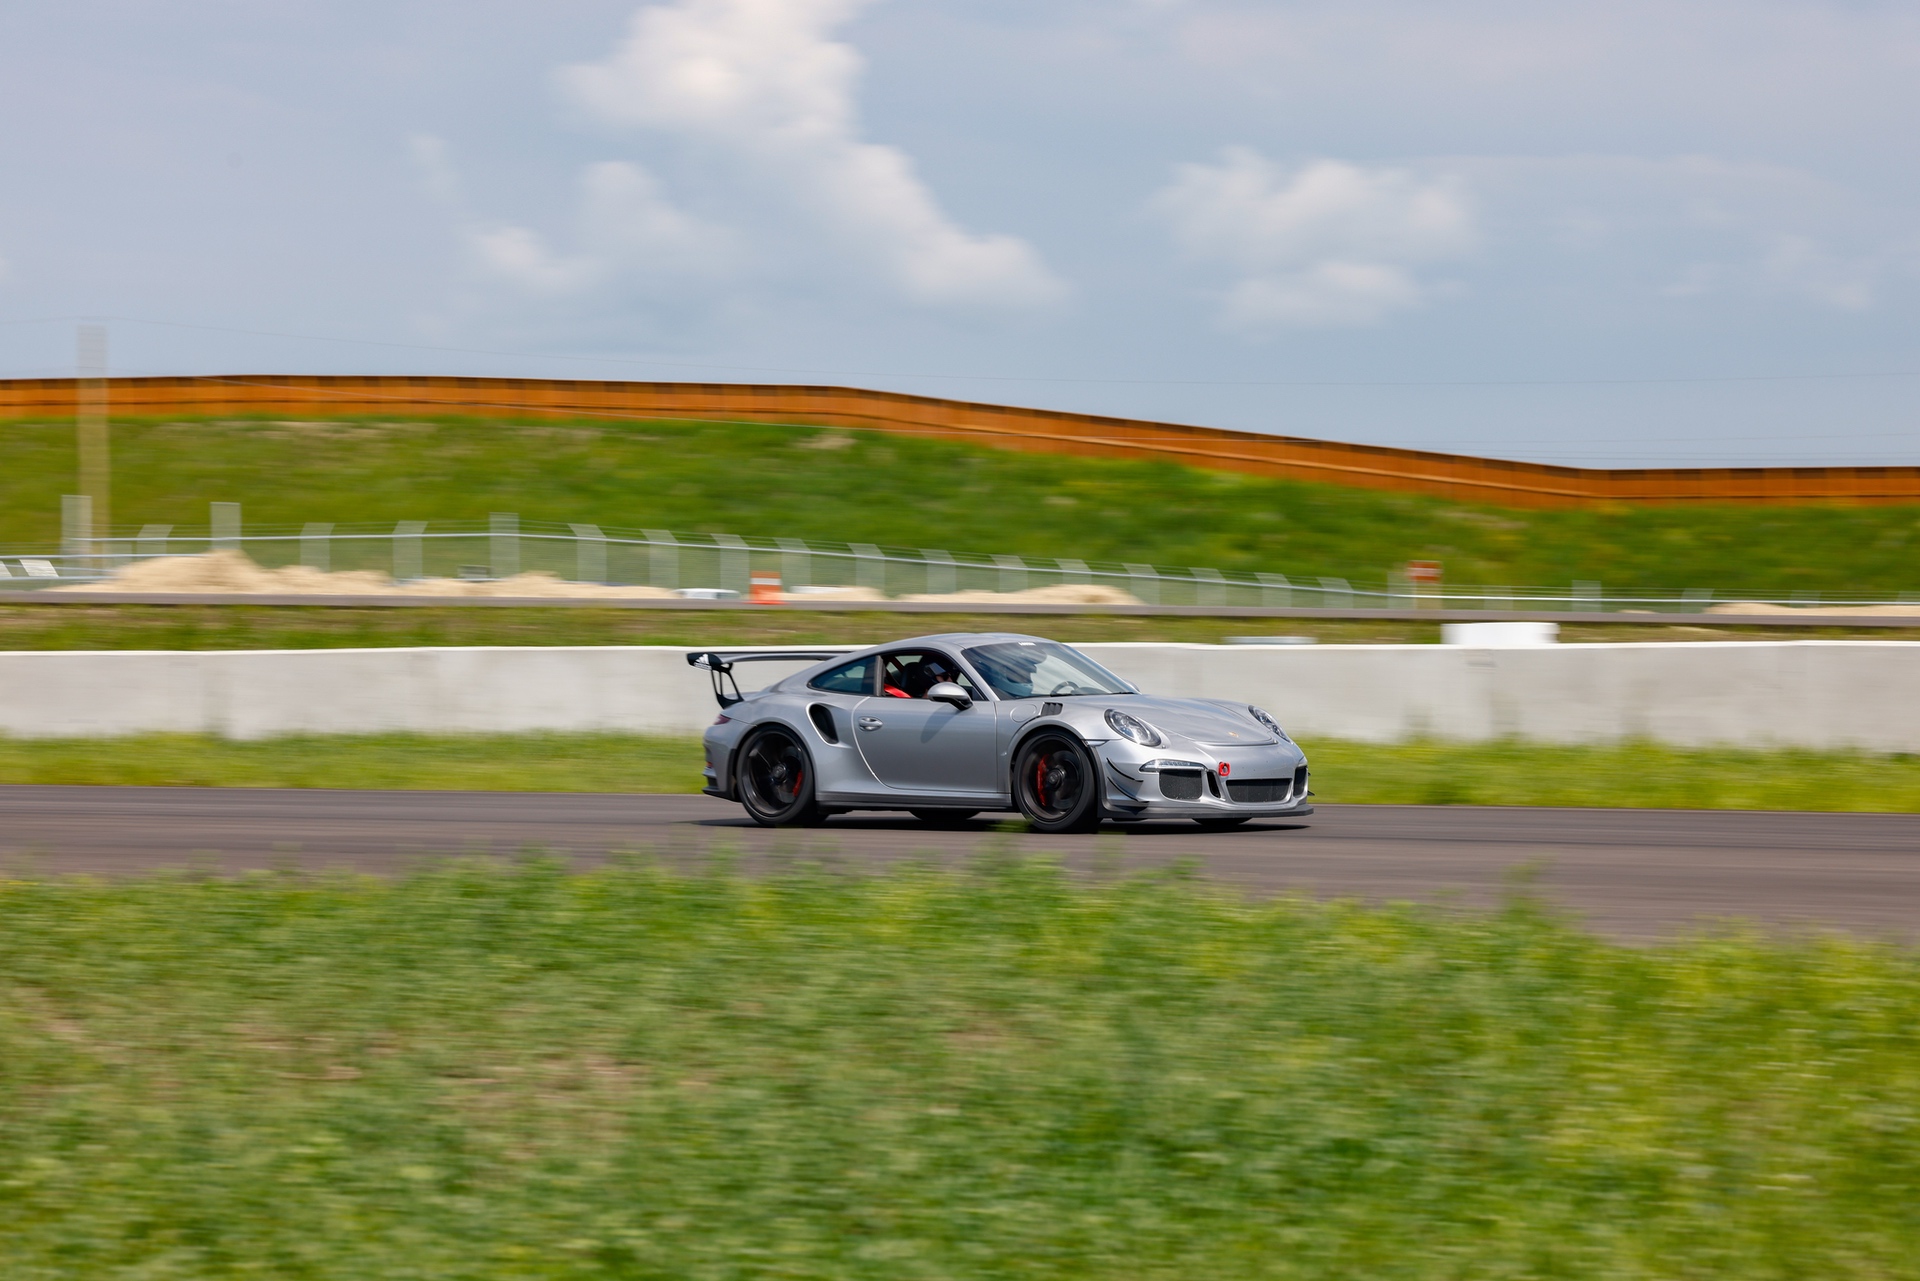 2016 Porsche 911 GT3 RS driving at speed on track